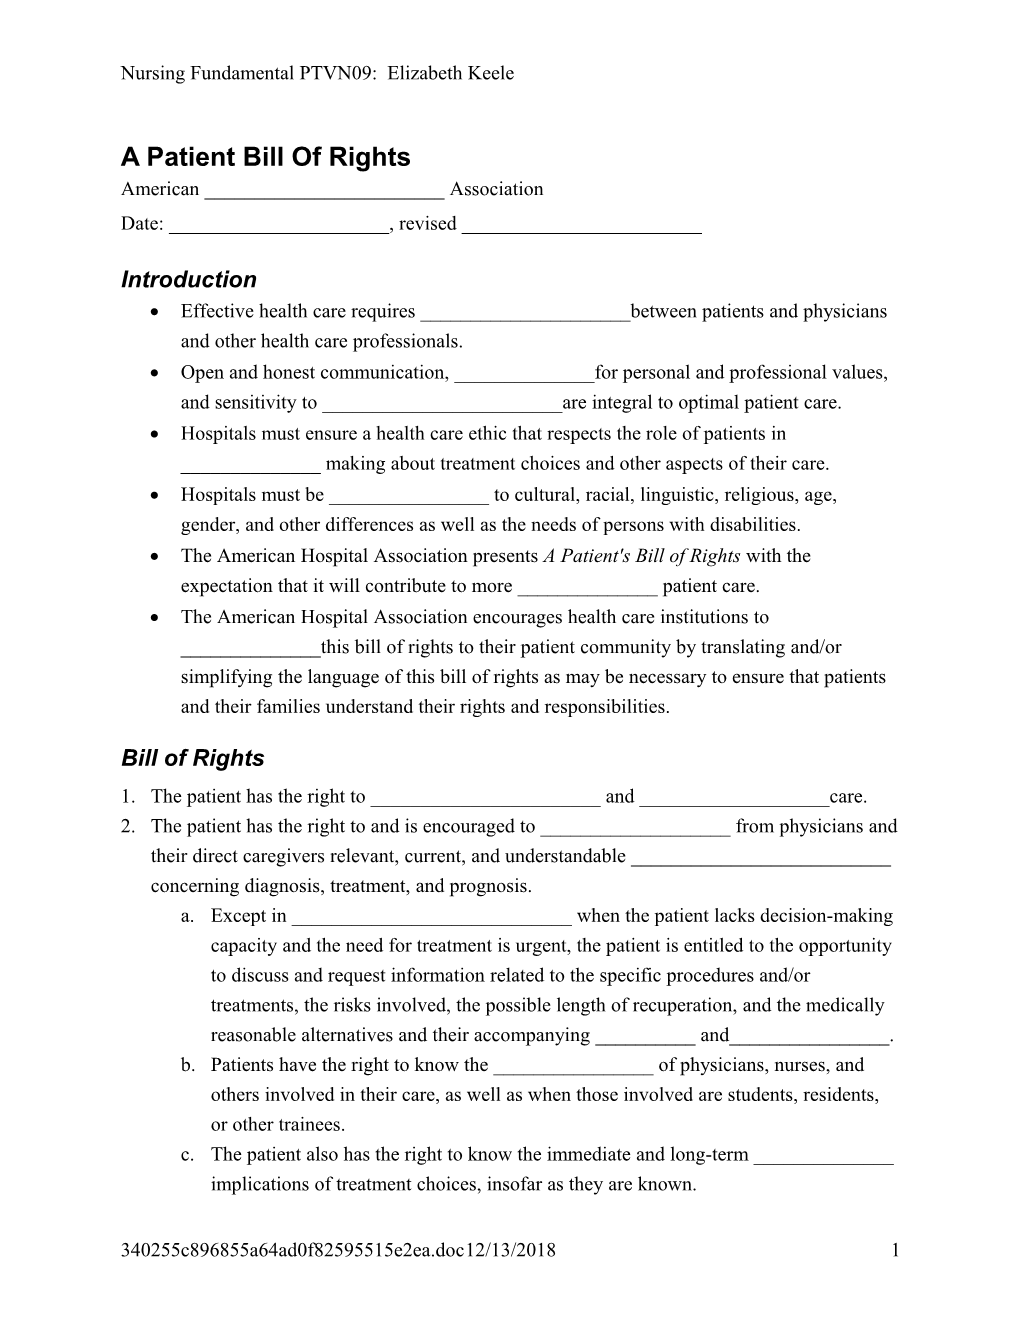 A Patient Bill of Rights